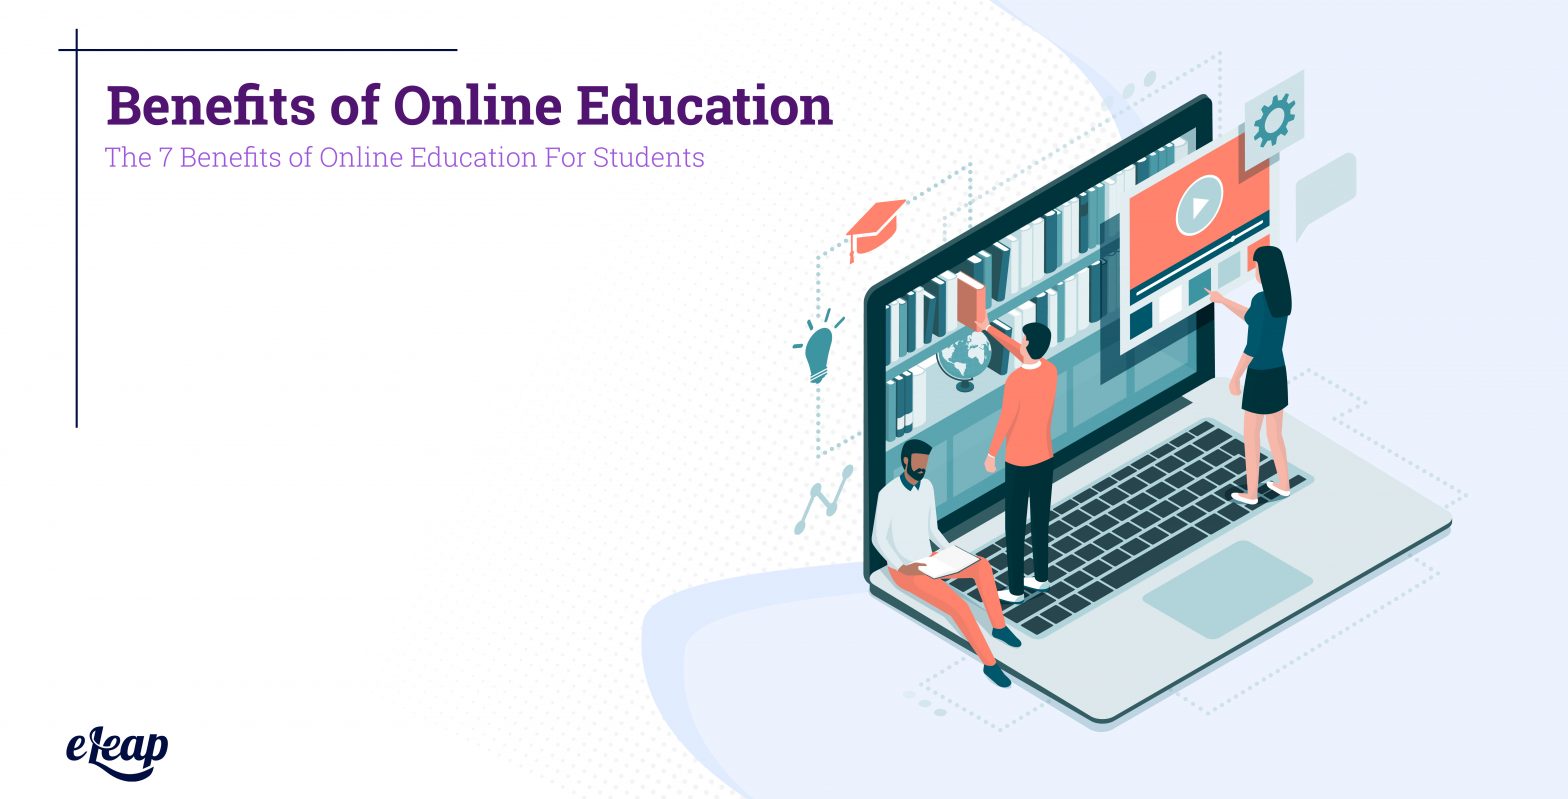 Benefits of Online Education